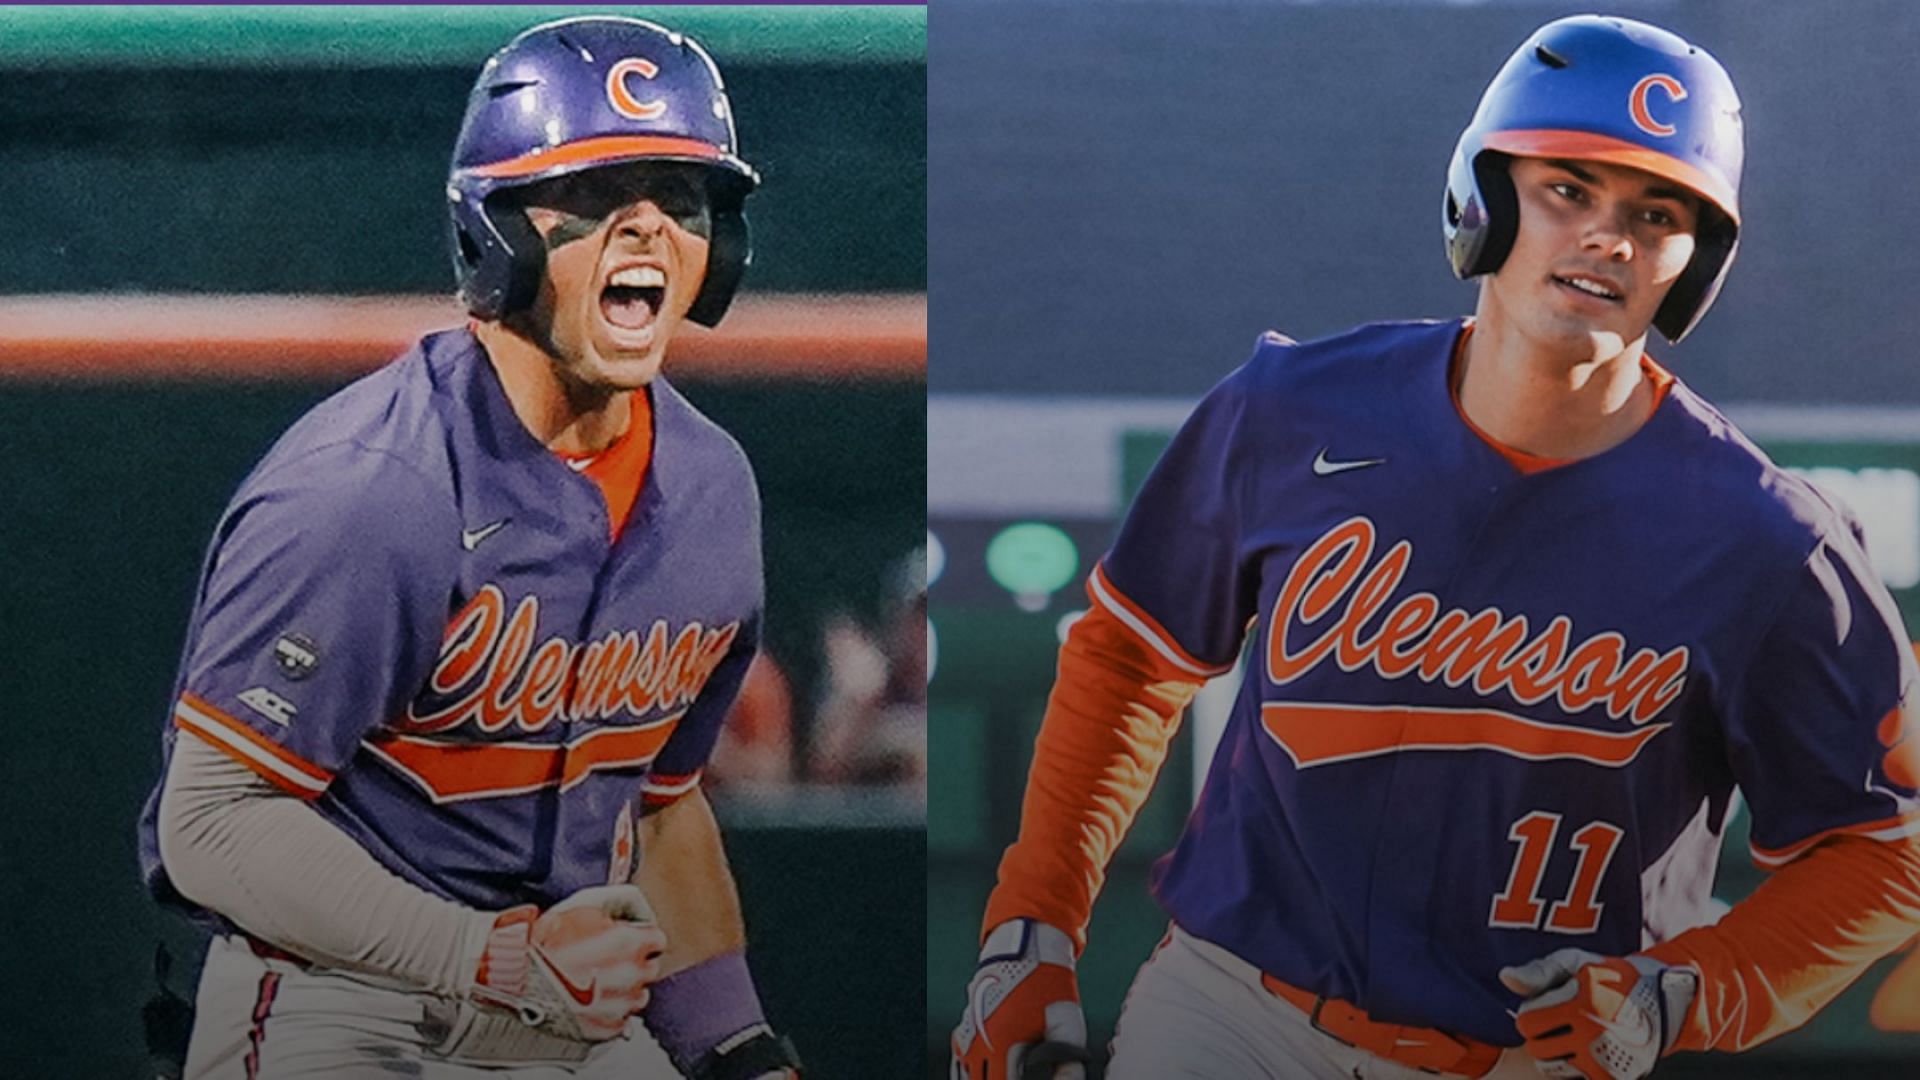 Clemson batters Blake Wright and Jimmy Obertop leads the team in homeruns with 19 and 16 HRs, respectively.